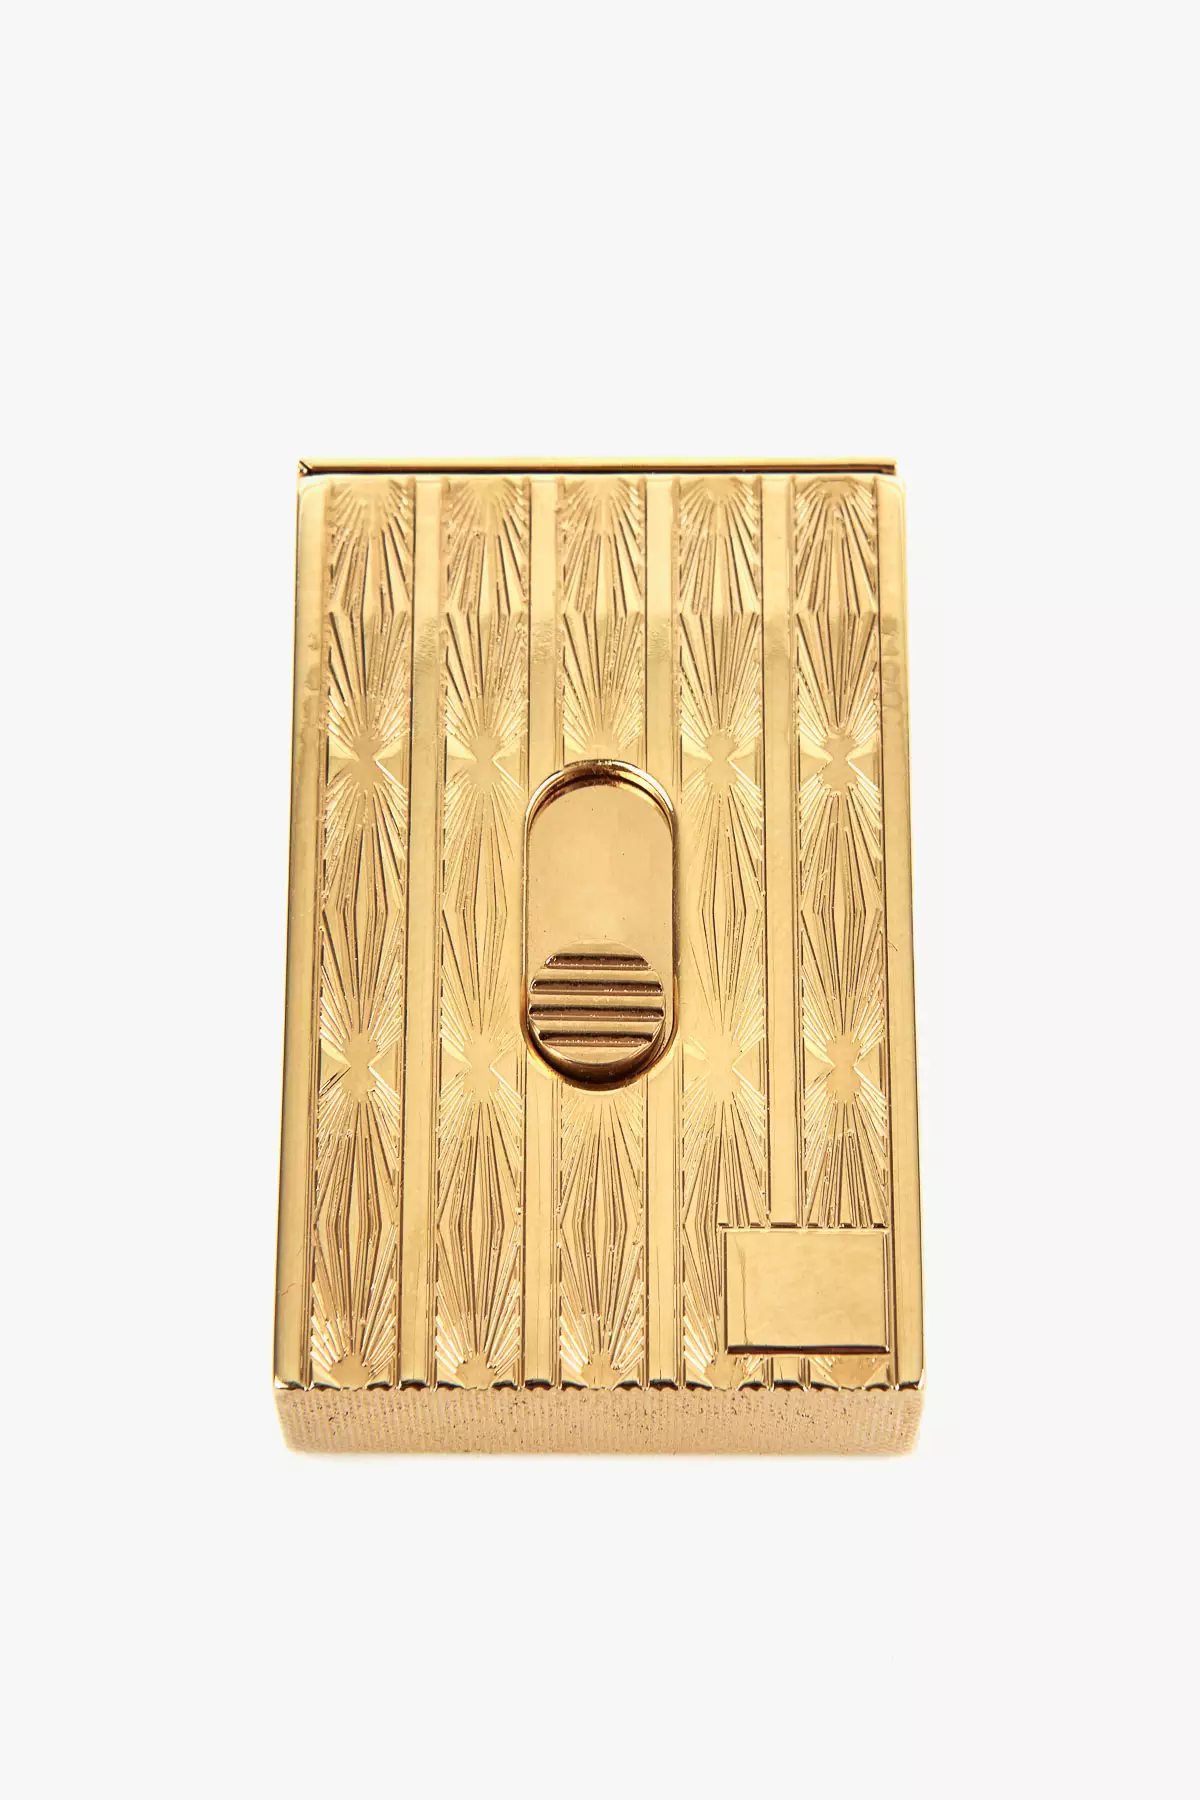 Giuliva Heritage Matches Box in Brass with Gold Finish